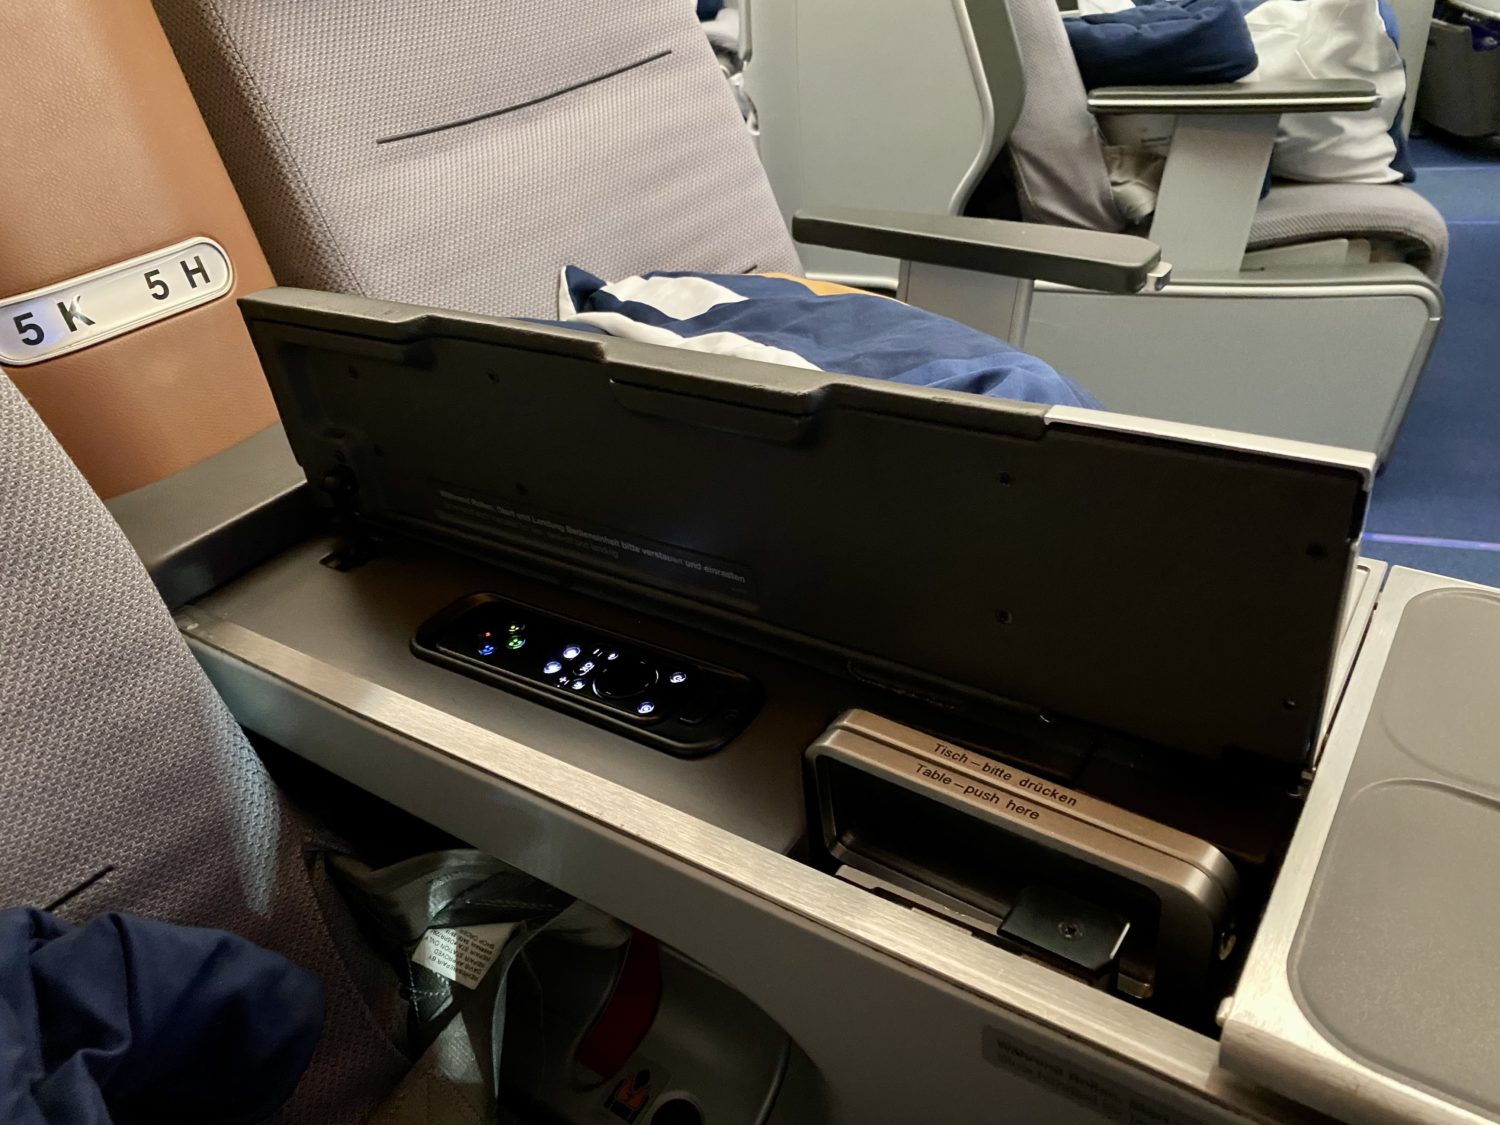 lufthansa business class tray table